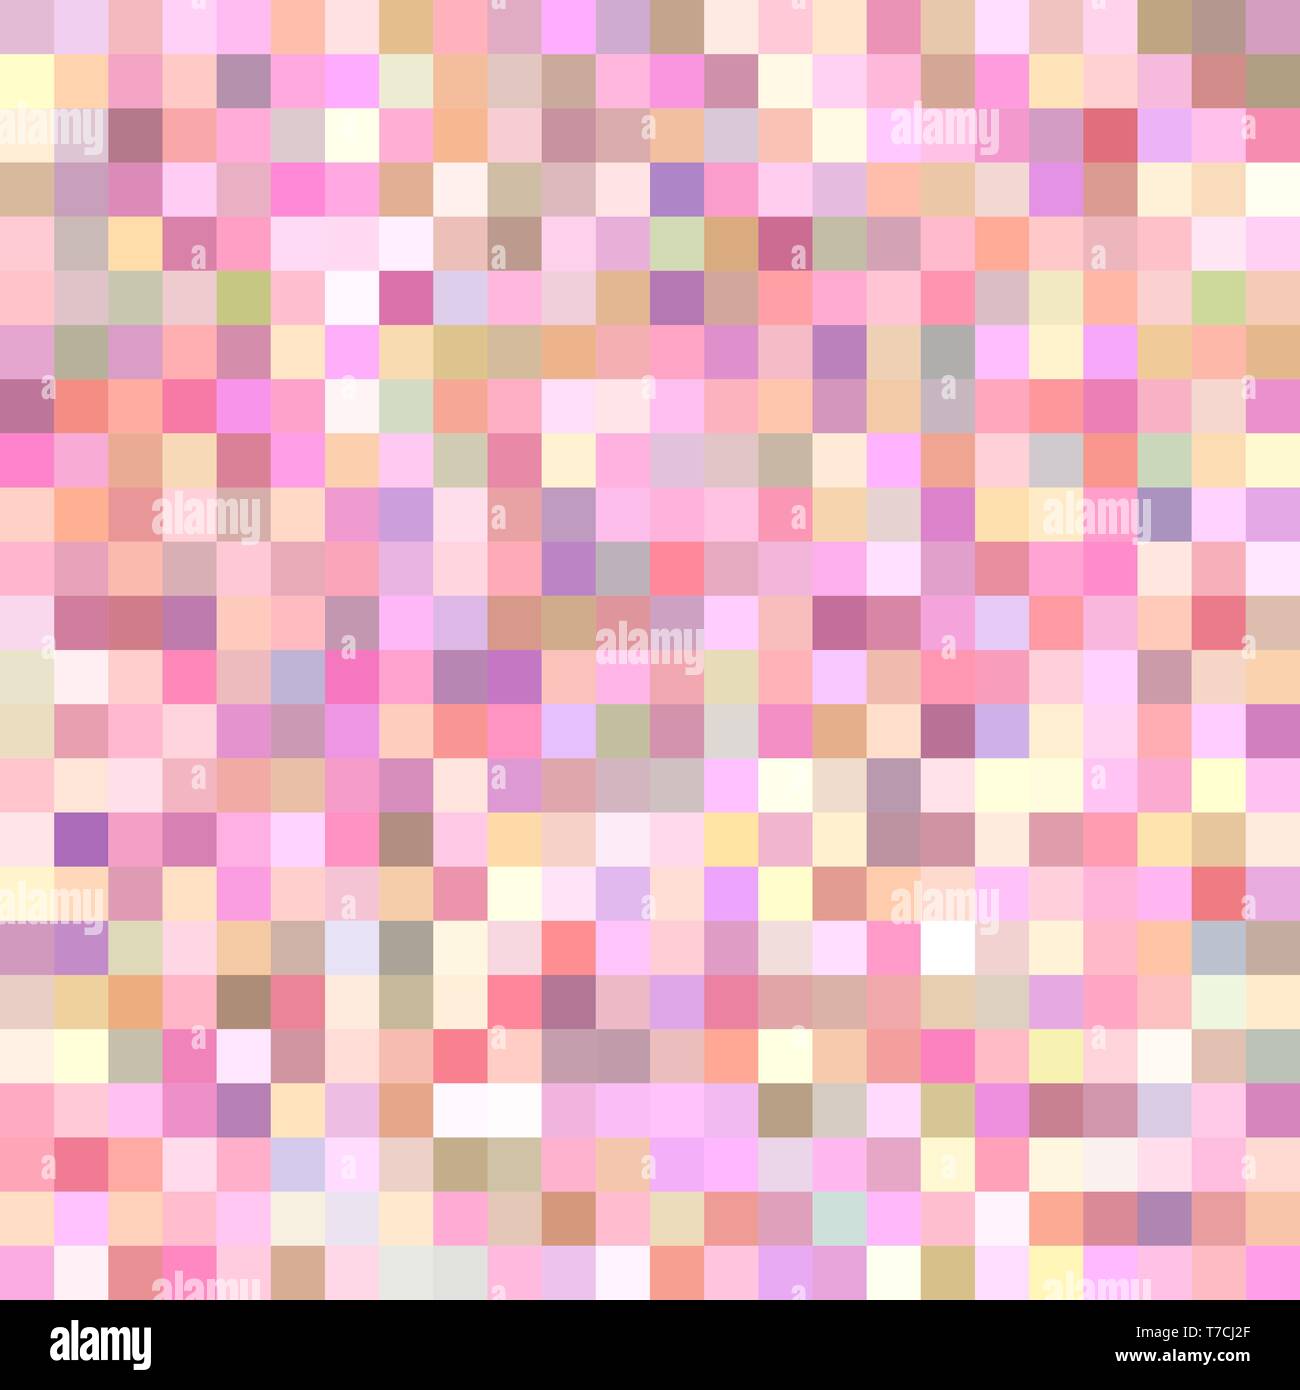 Pixel square tile mosaic background - vector graphic design Stock Vector